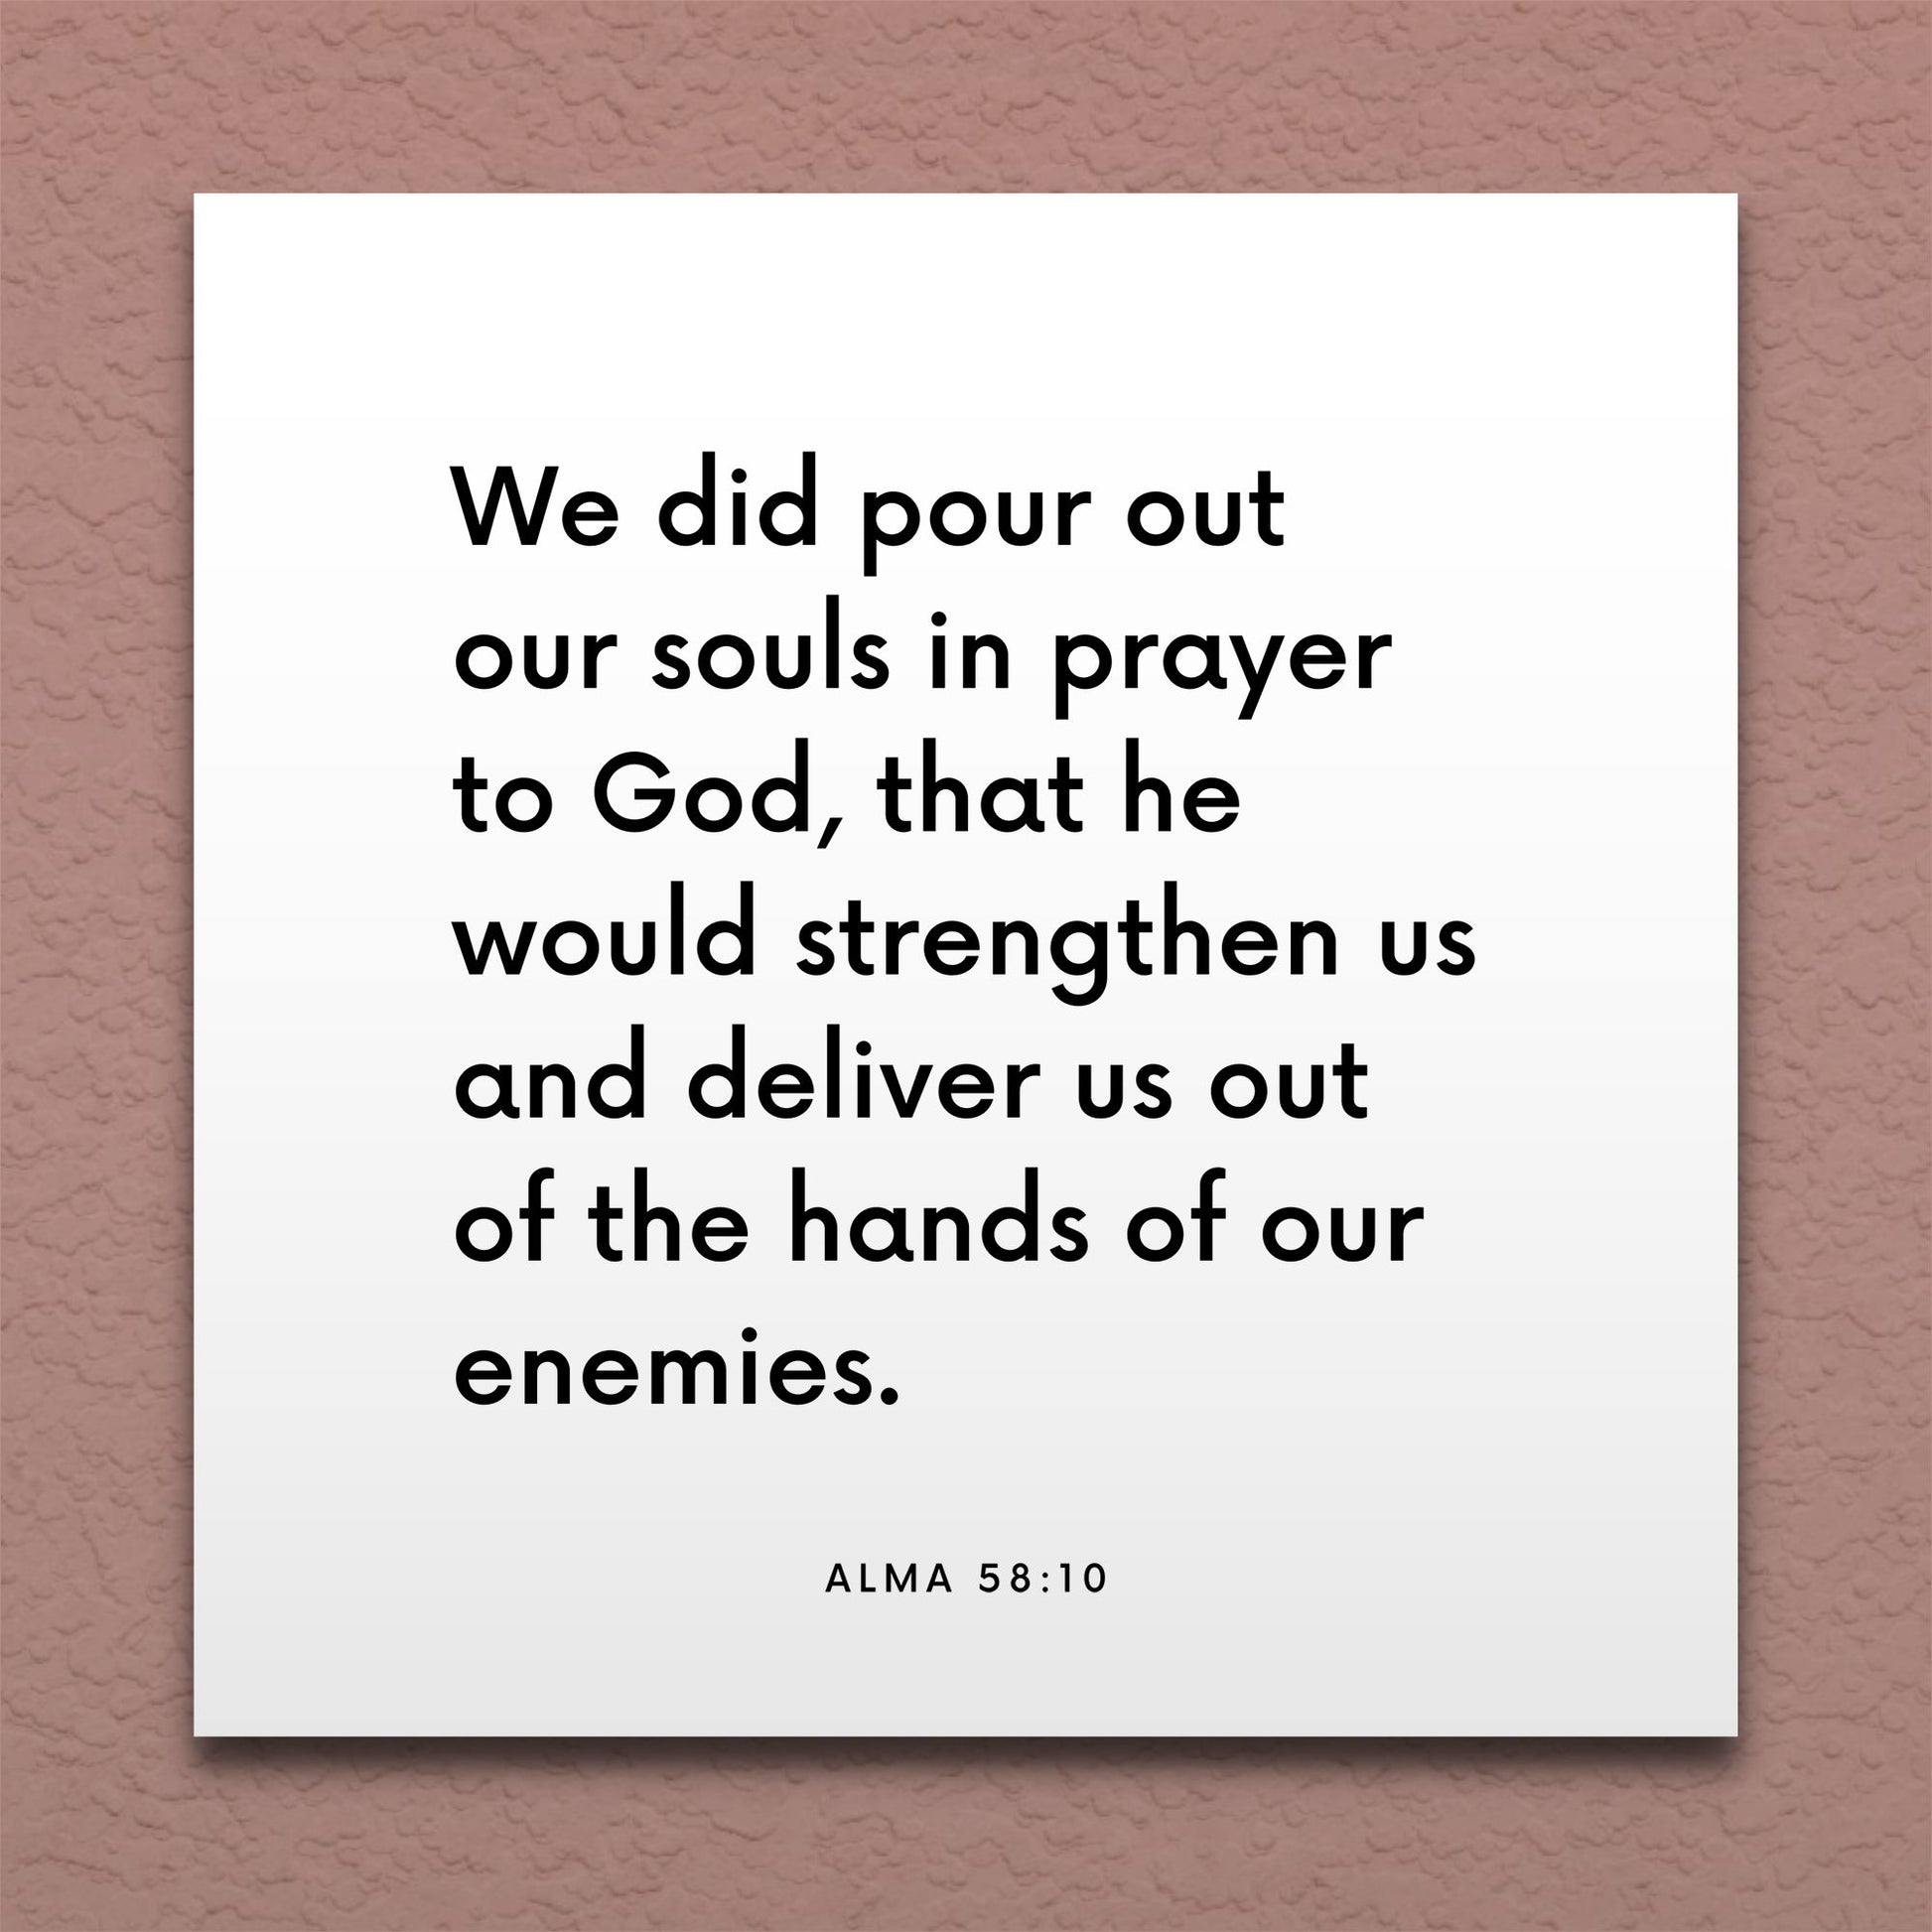 Wall-mounted scripture tile for Alma 58:10 - "We did pour out our souls in prayer to God"